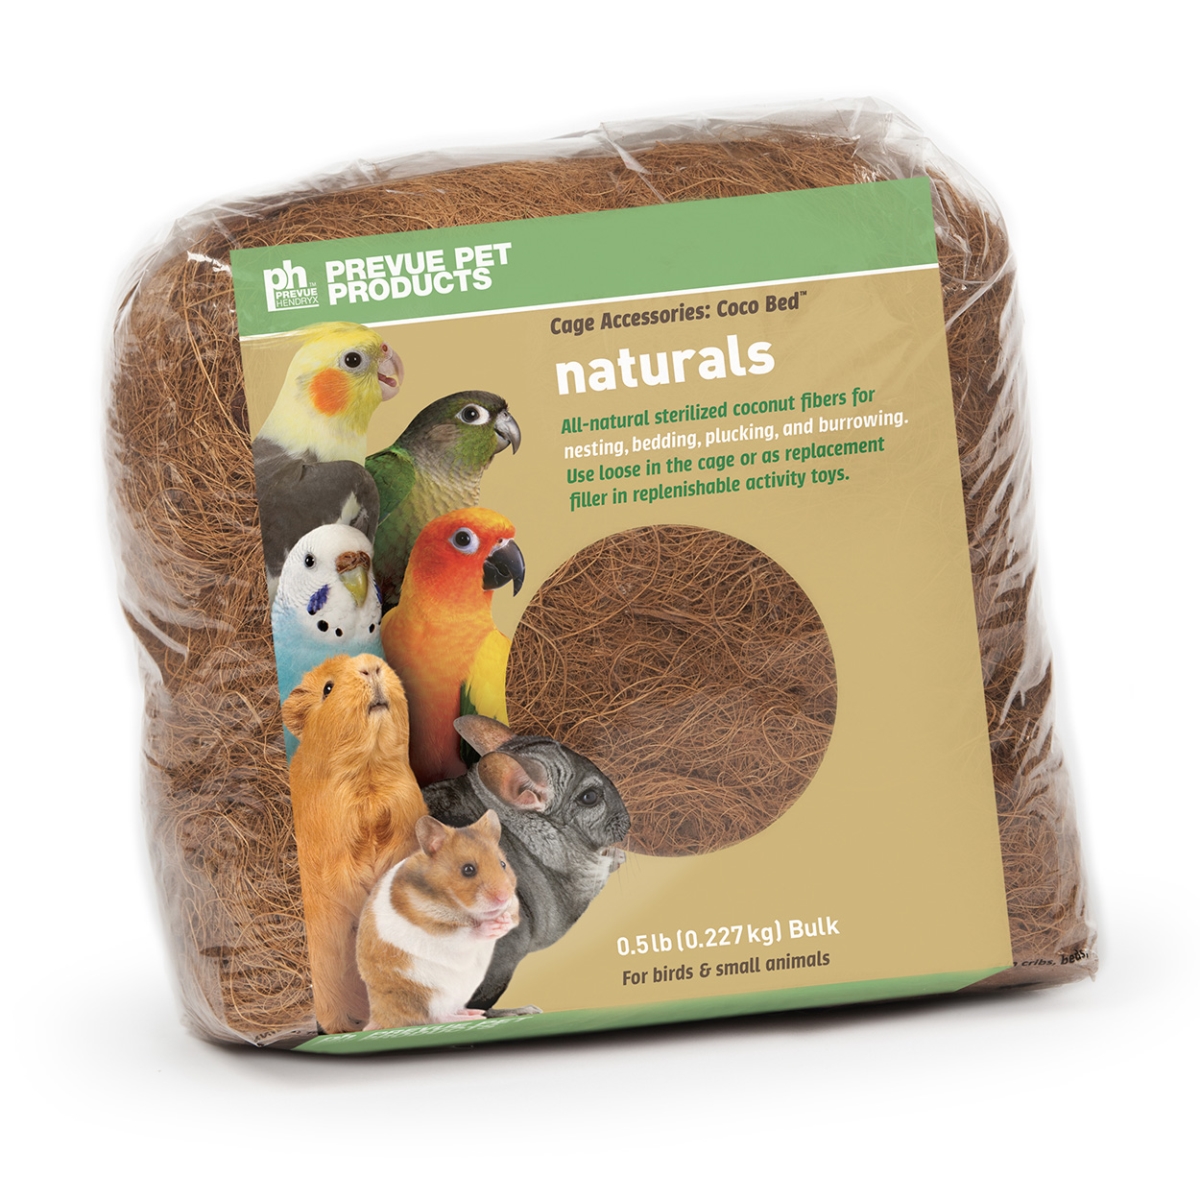 Picture of Prevue Pet Products 480419 Coco Bed Fiber Nature Bird Toy - Brown